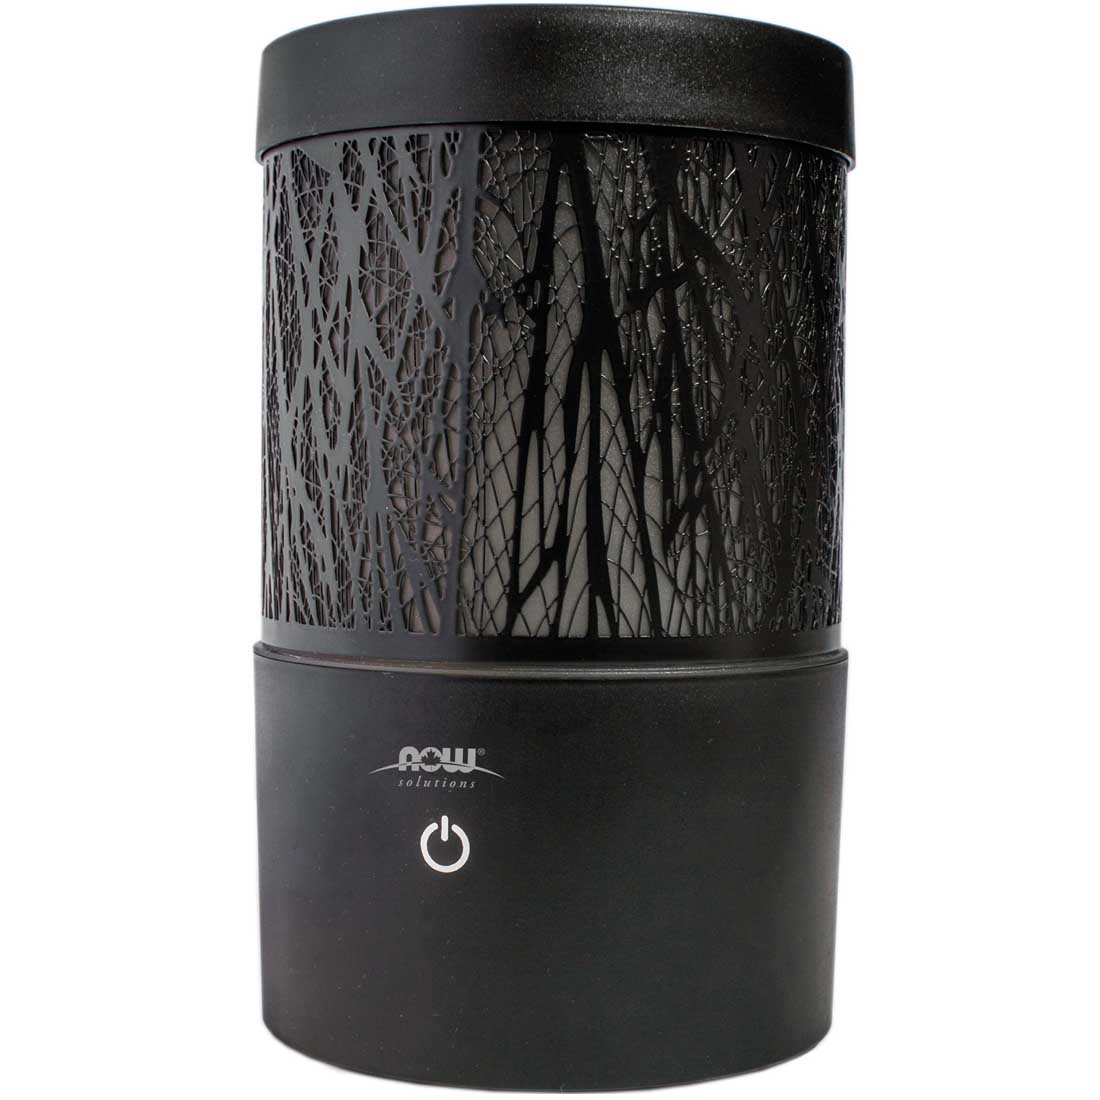 NOW Metal Touch Ultrasonic Essential Oil Diffuser, Black